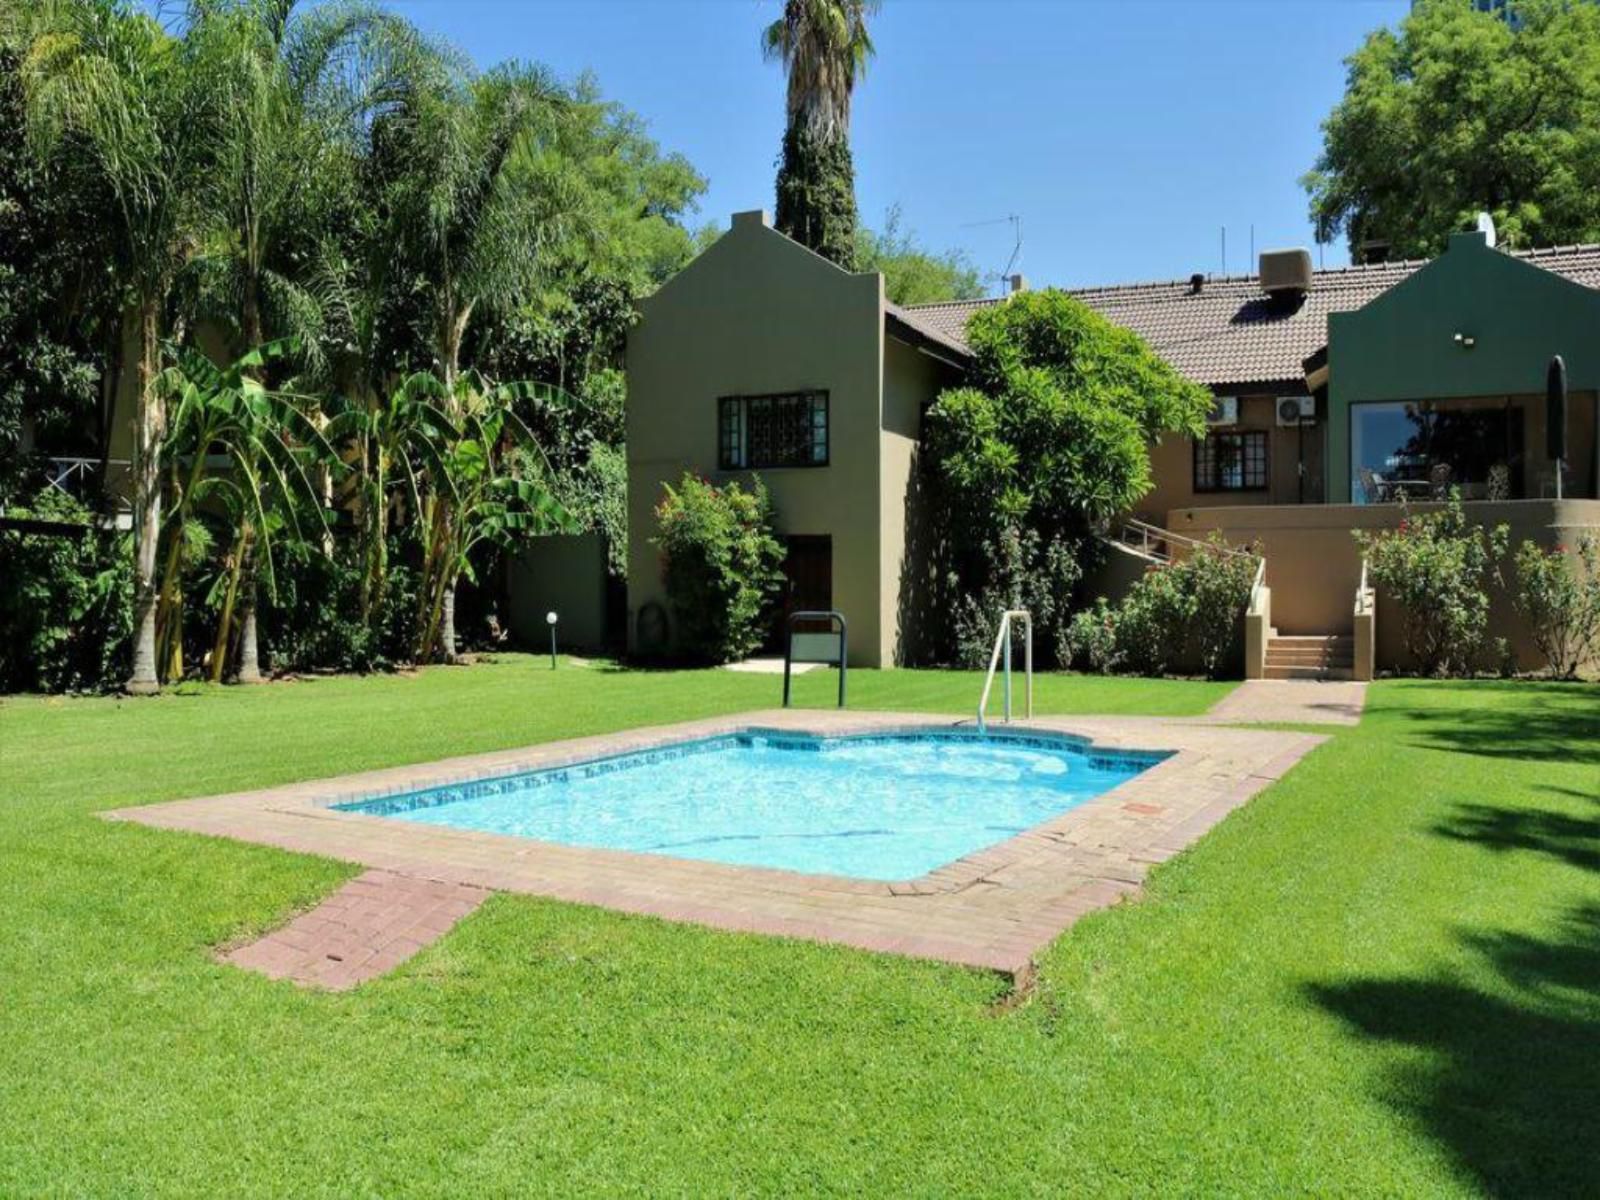 Moon River Guest House Upington Northern Cape South Africa House, Building, Architecture, Palm Tree, Plant, Nature, Wood, Garden, Swimming Pool